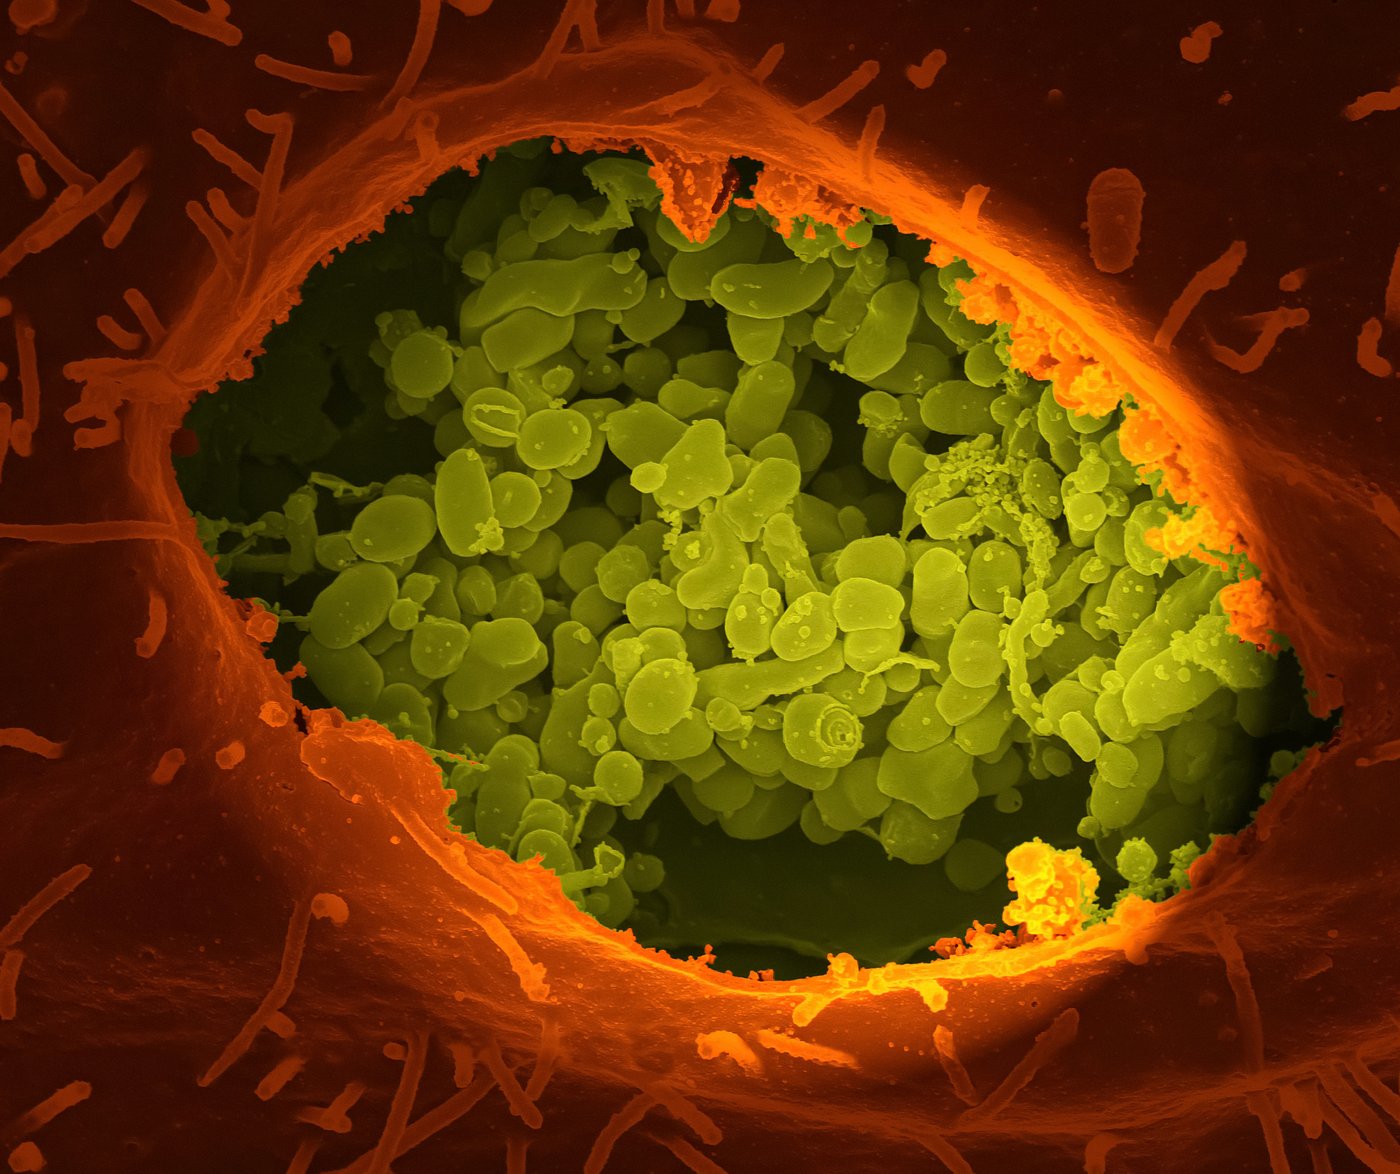 Re-stained scanning electron micrograph of a ruptured cell with coxials: A reddish-orange cell opening with many smaller light green spheres inside.